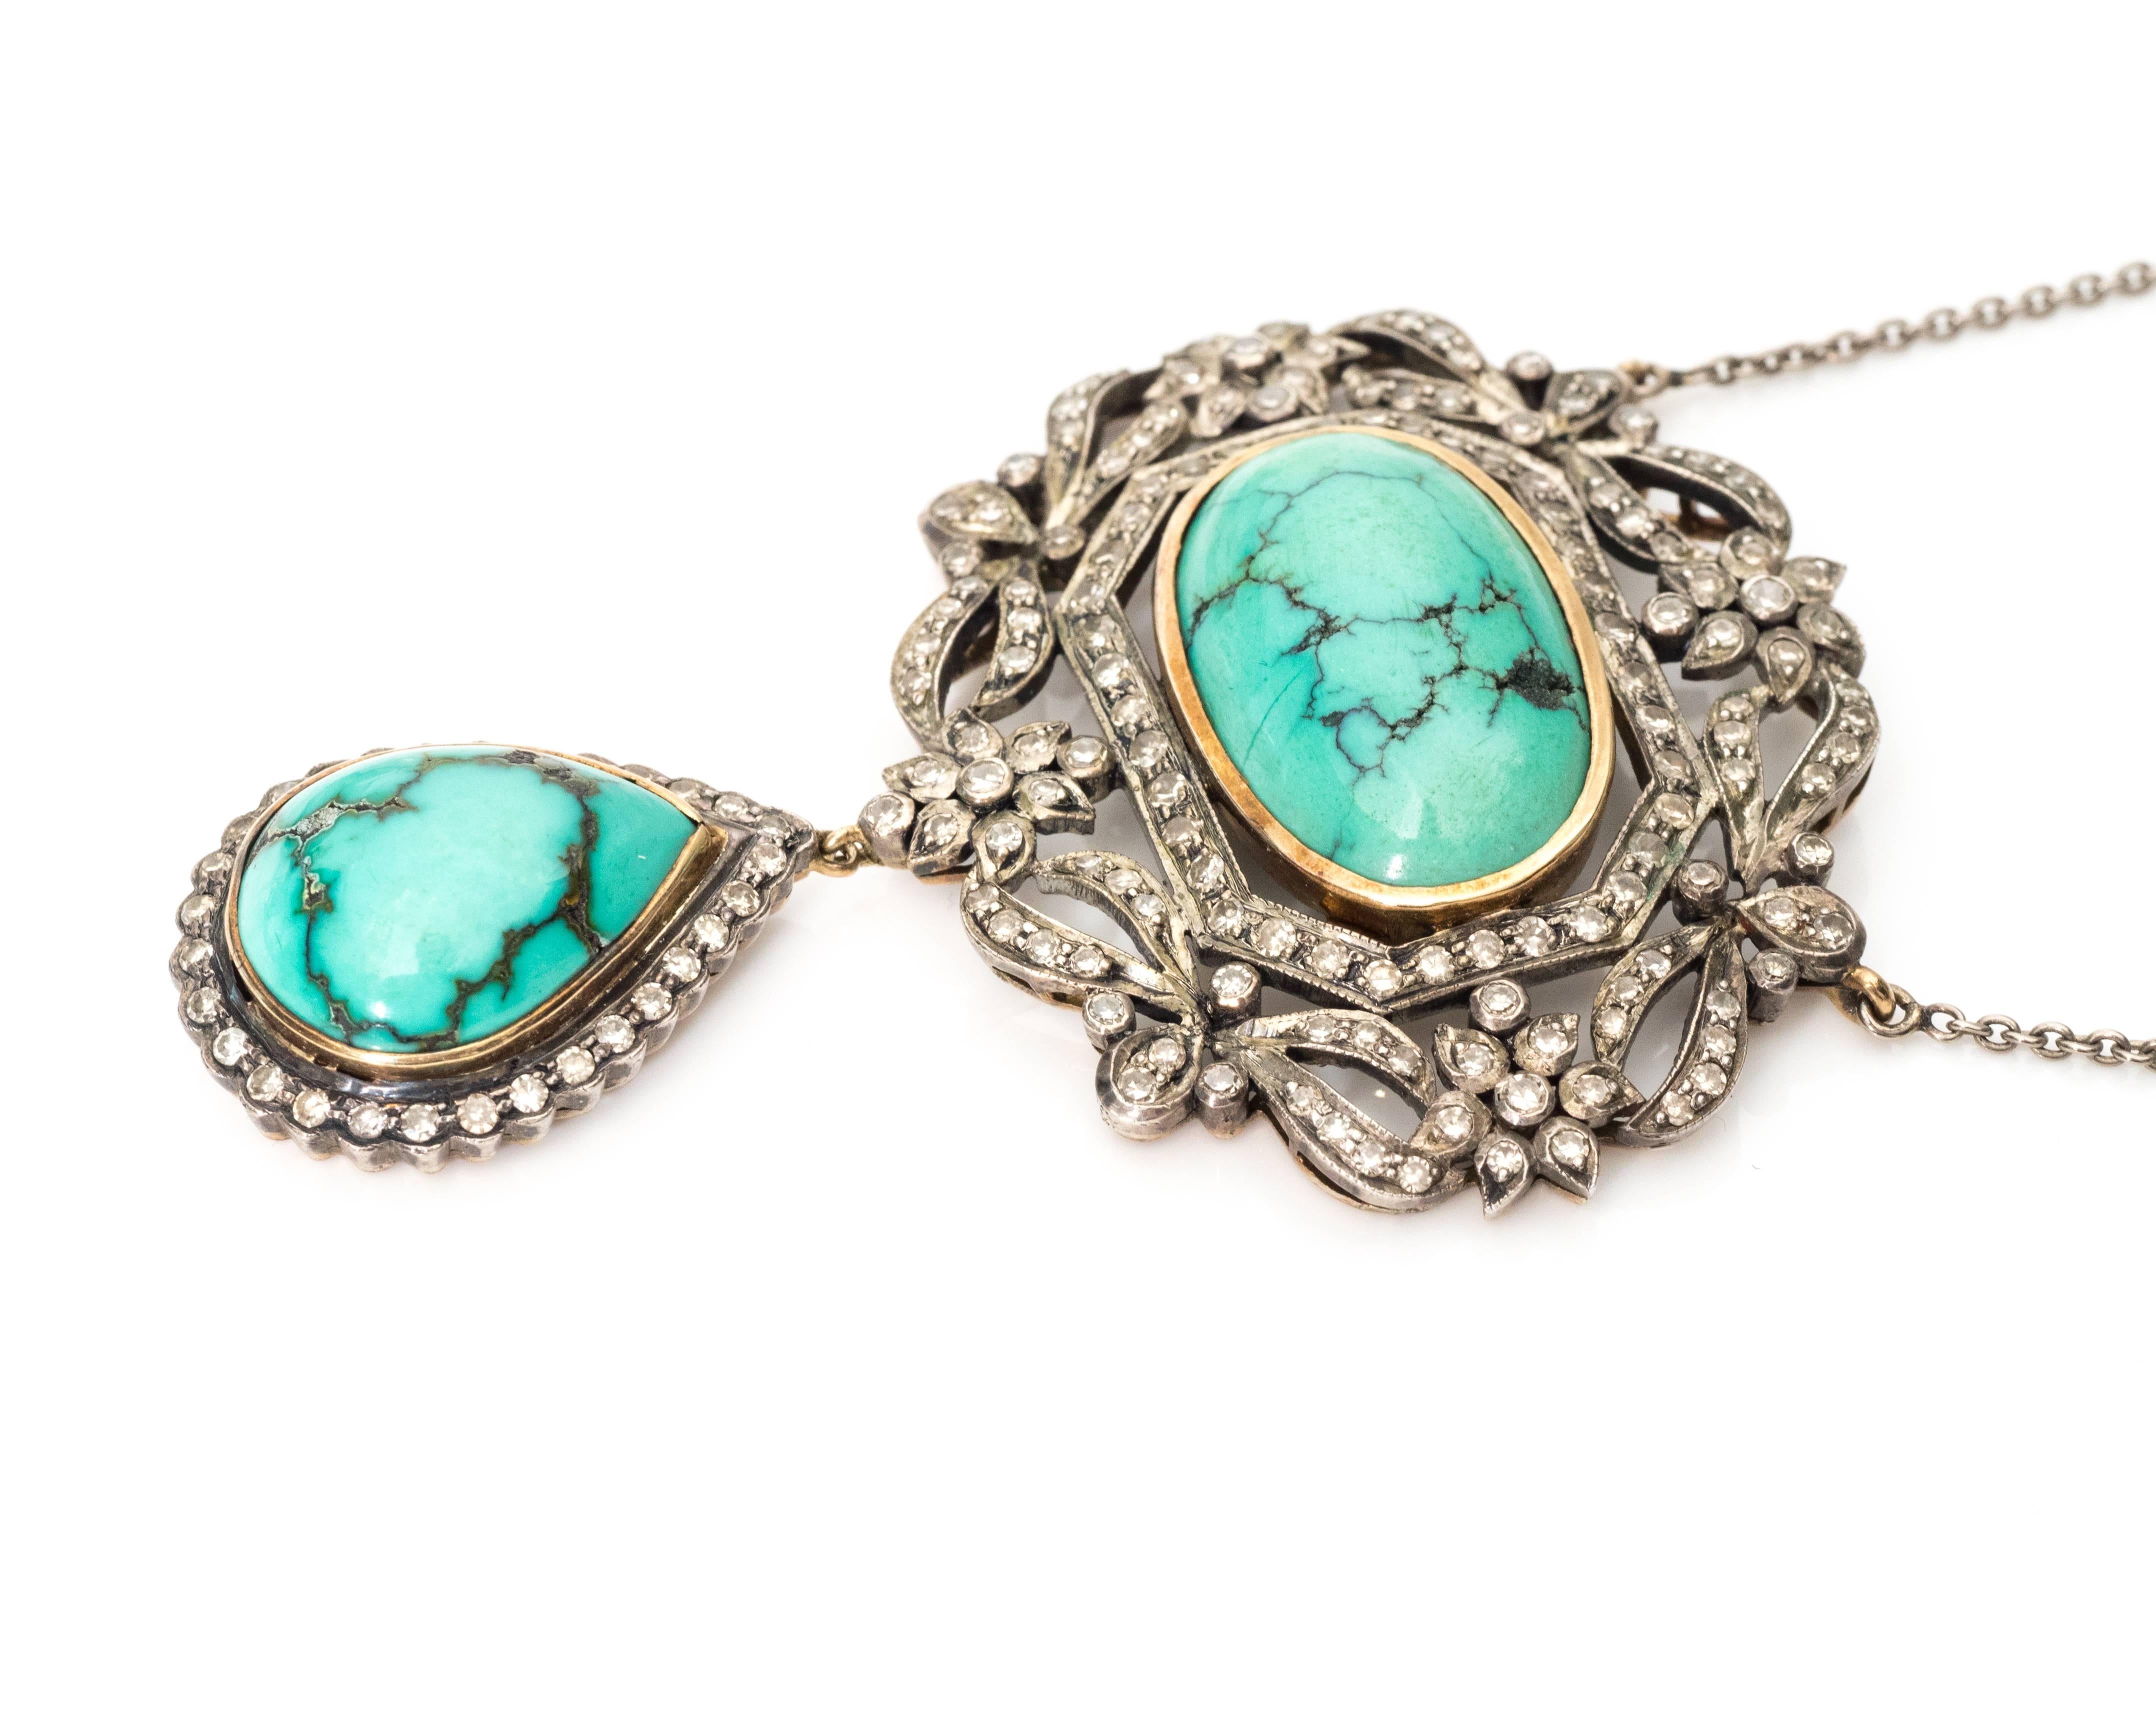 1800s Victorian Diamond, Turquoise and 18 Karat Gold Necklace features .70 carats total weight of Diamonds, 12 carats total weight of Turquoise and 18 Karat Yellow and White Gold. Necklace length is 10 inches. 

Beautiful Turquoise in the center and